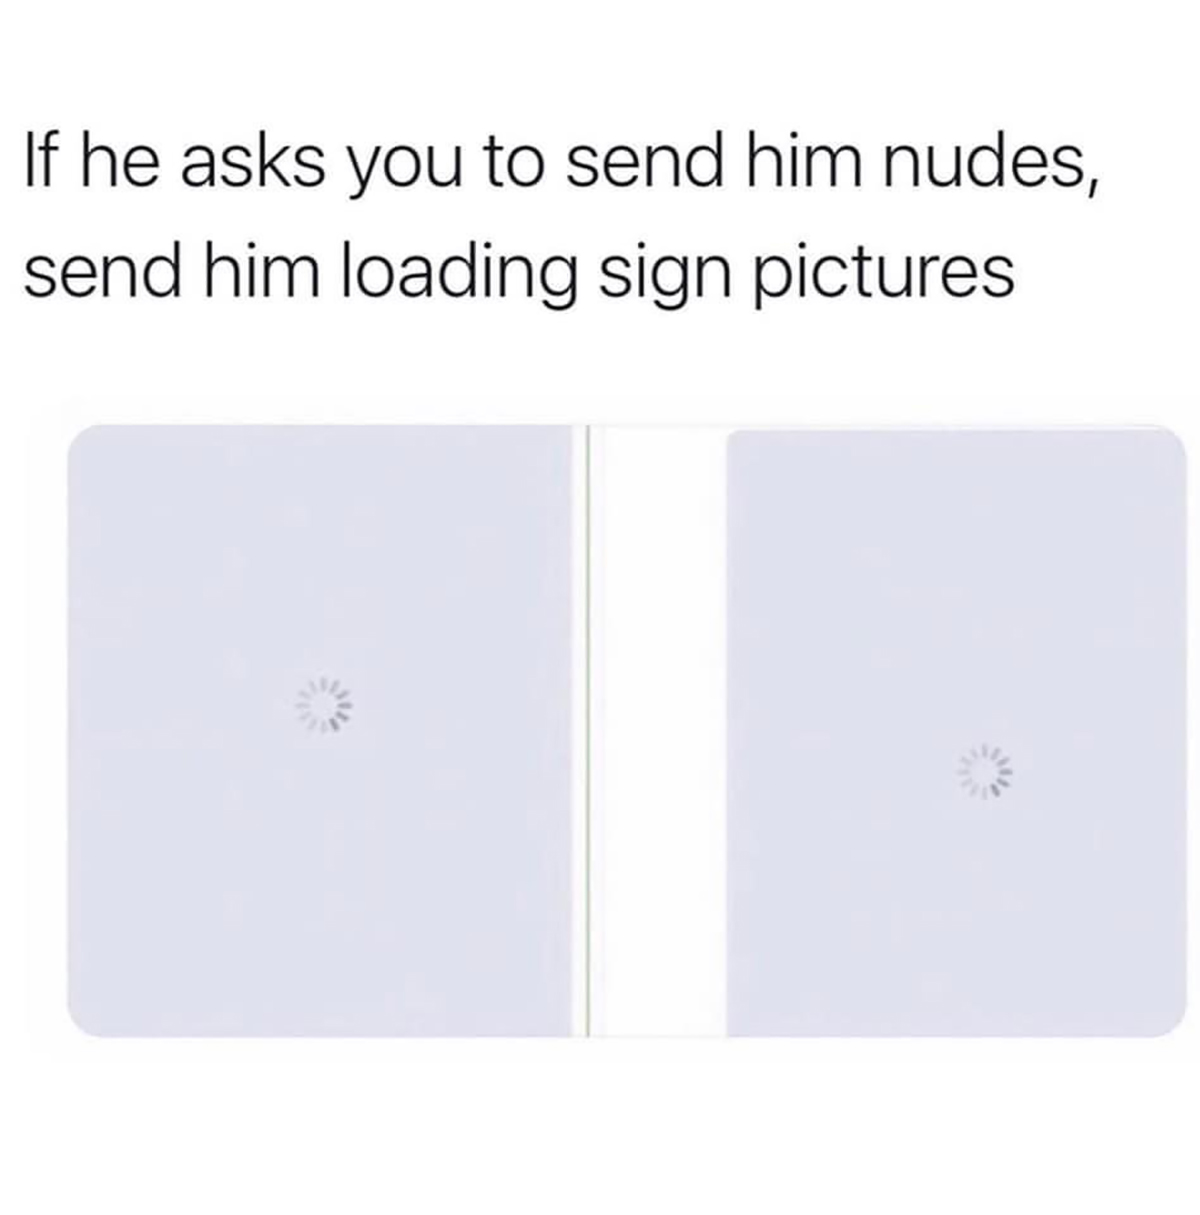 fresh memes - multimedia - If he asks you to send him nudes, send him loading sign pictures